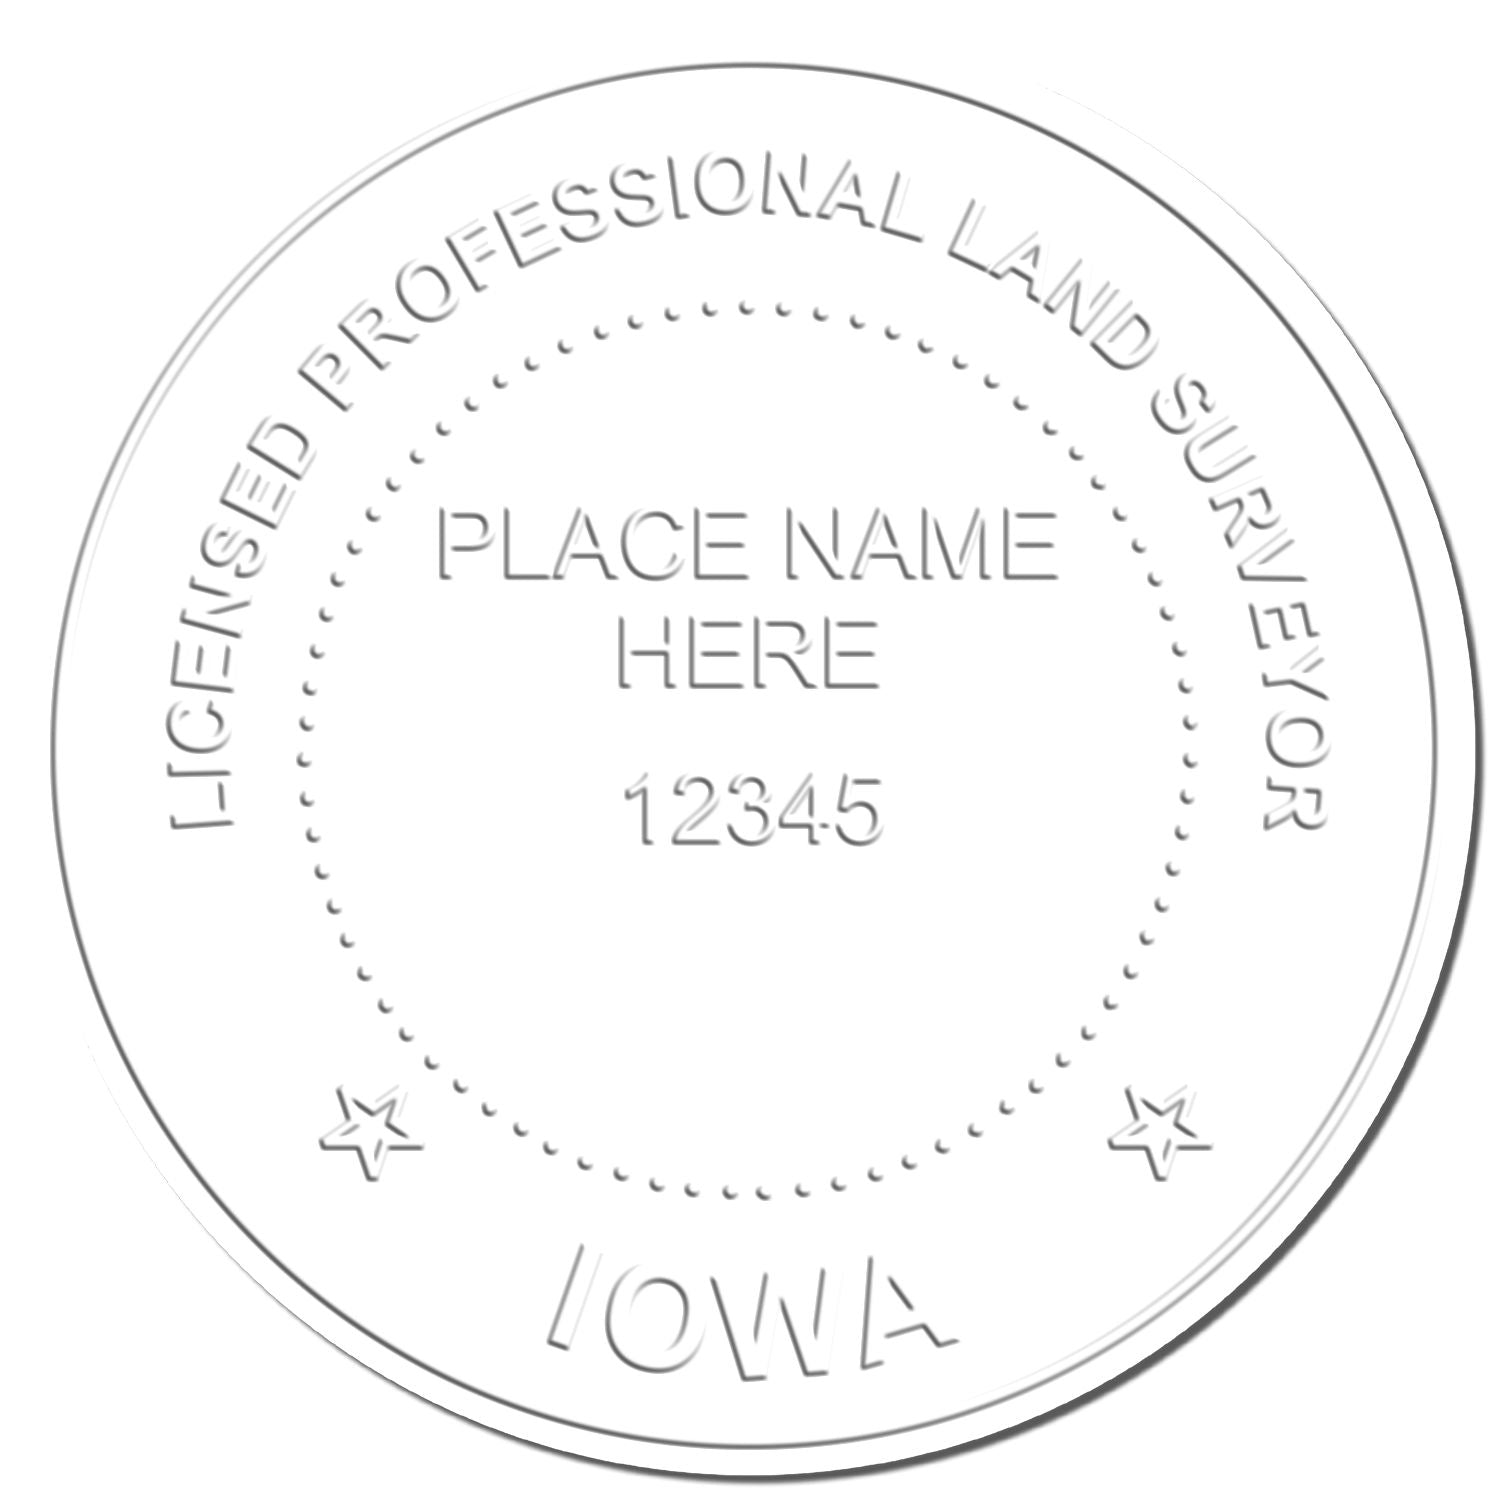 The main image for the Long Reach Iowa Land Surveyor Seal depicting a sample of the imprint and electronic files